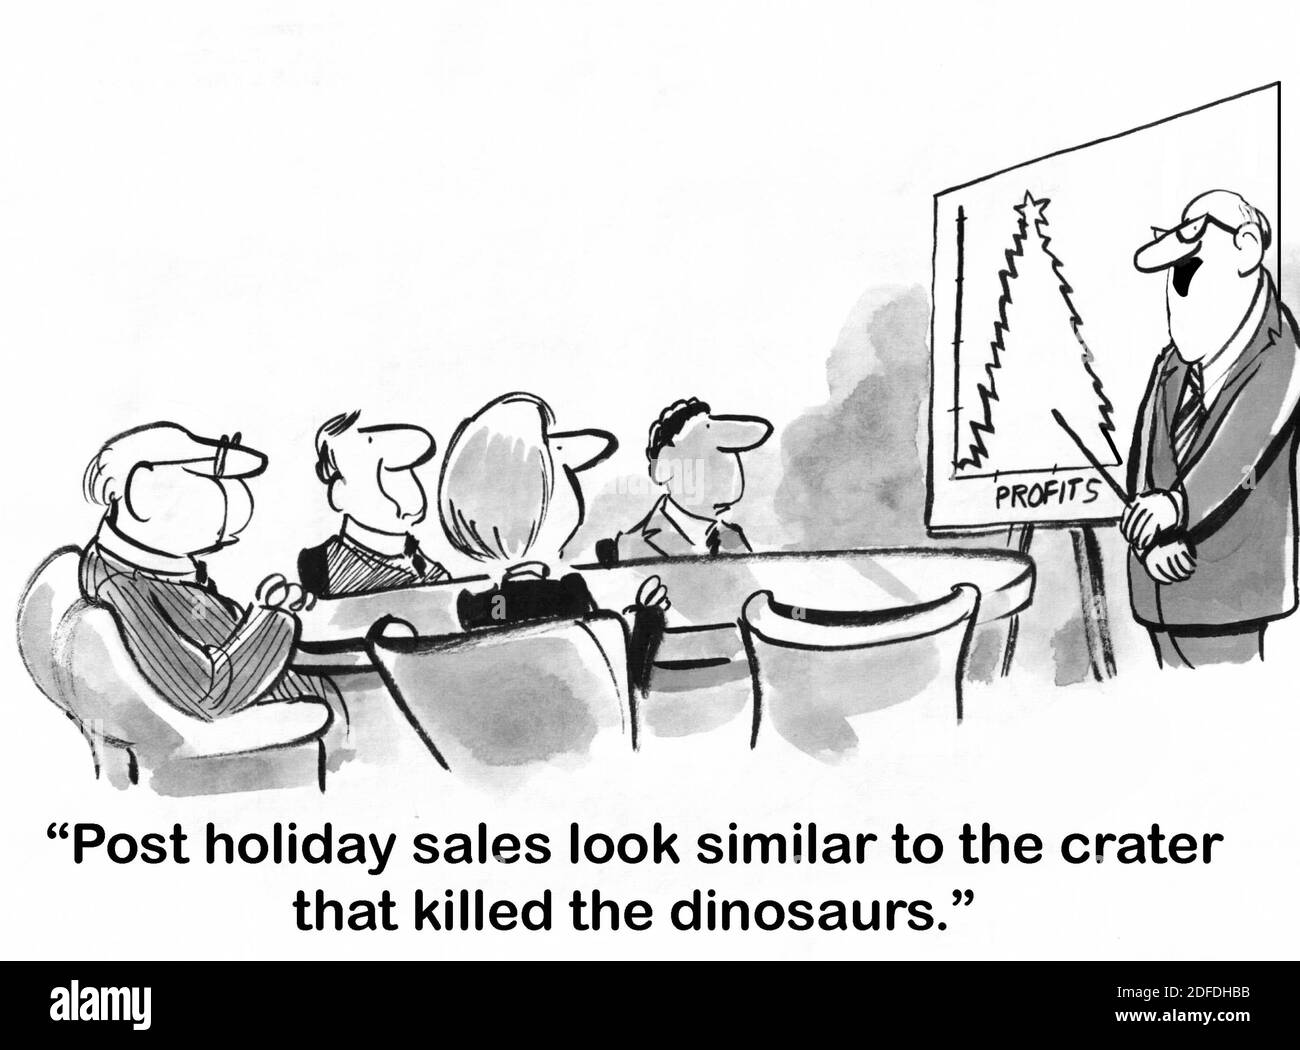 Presentation by sales manager shows that all profits will come from the holidays. Stock Photo